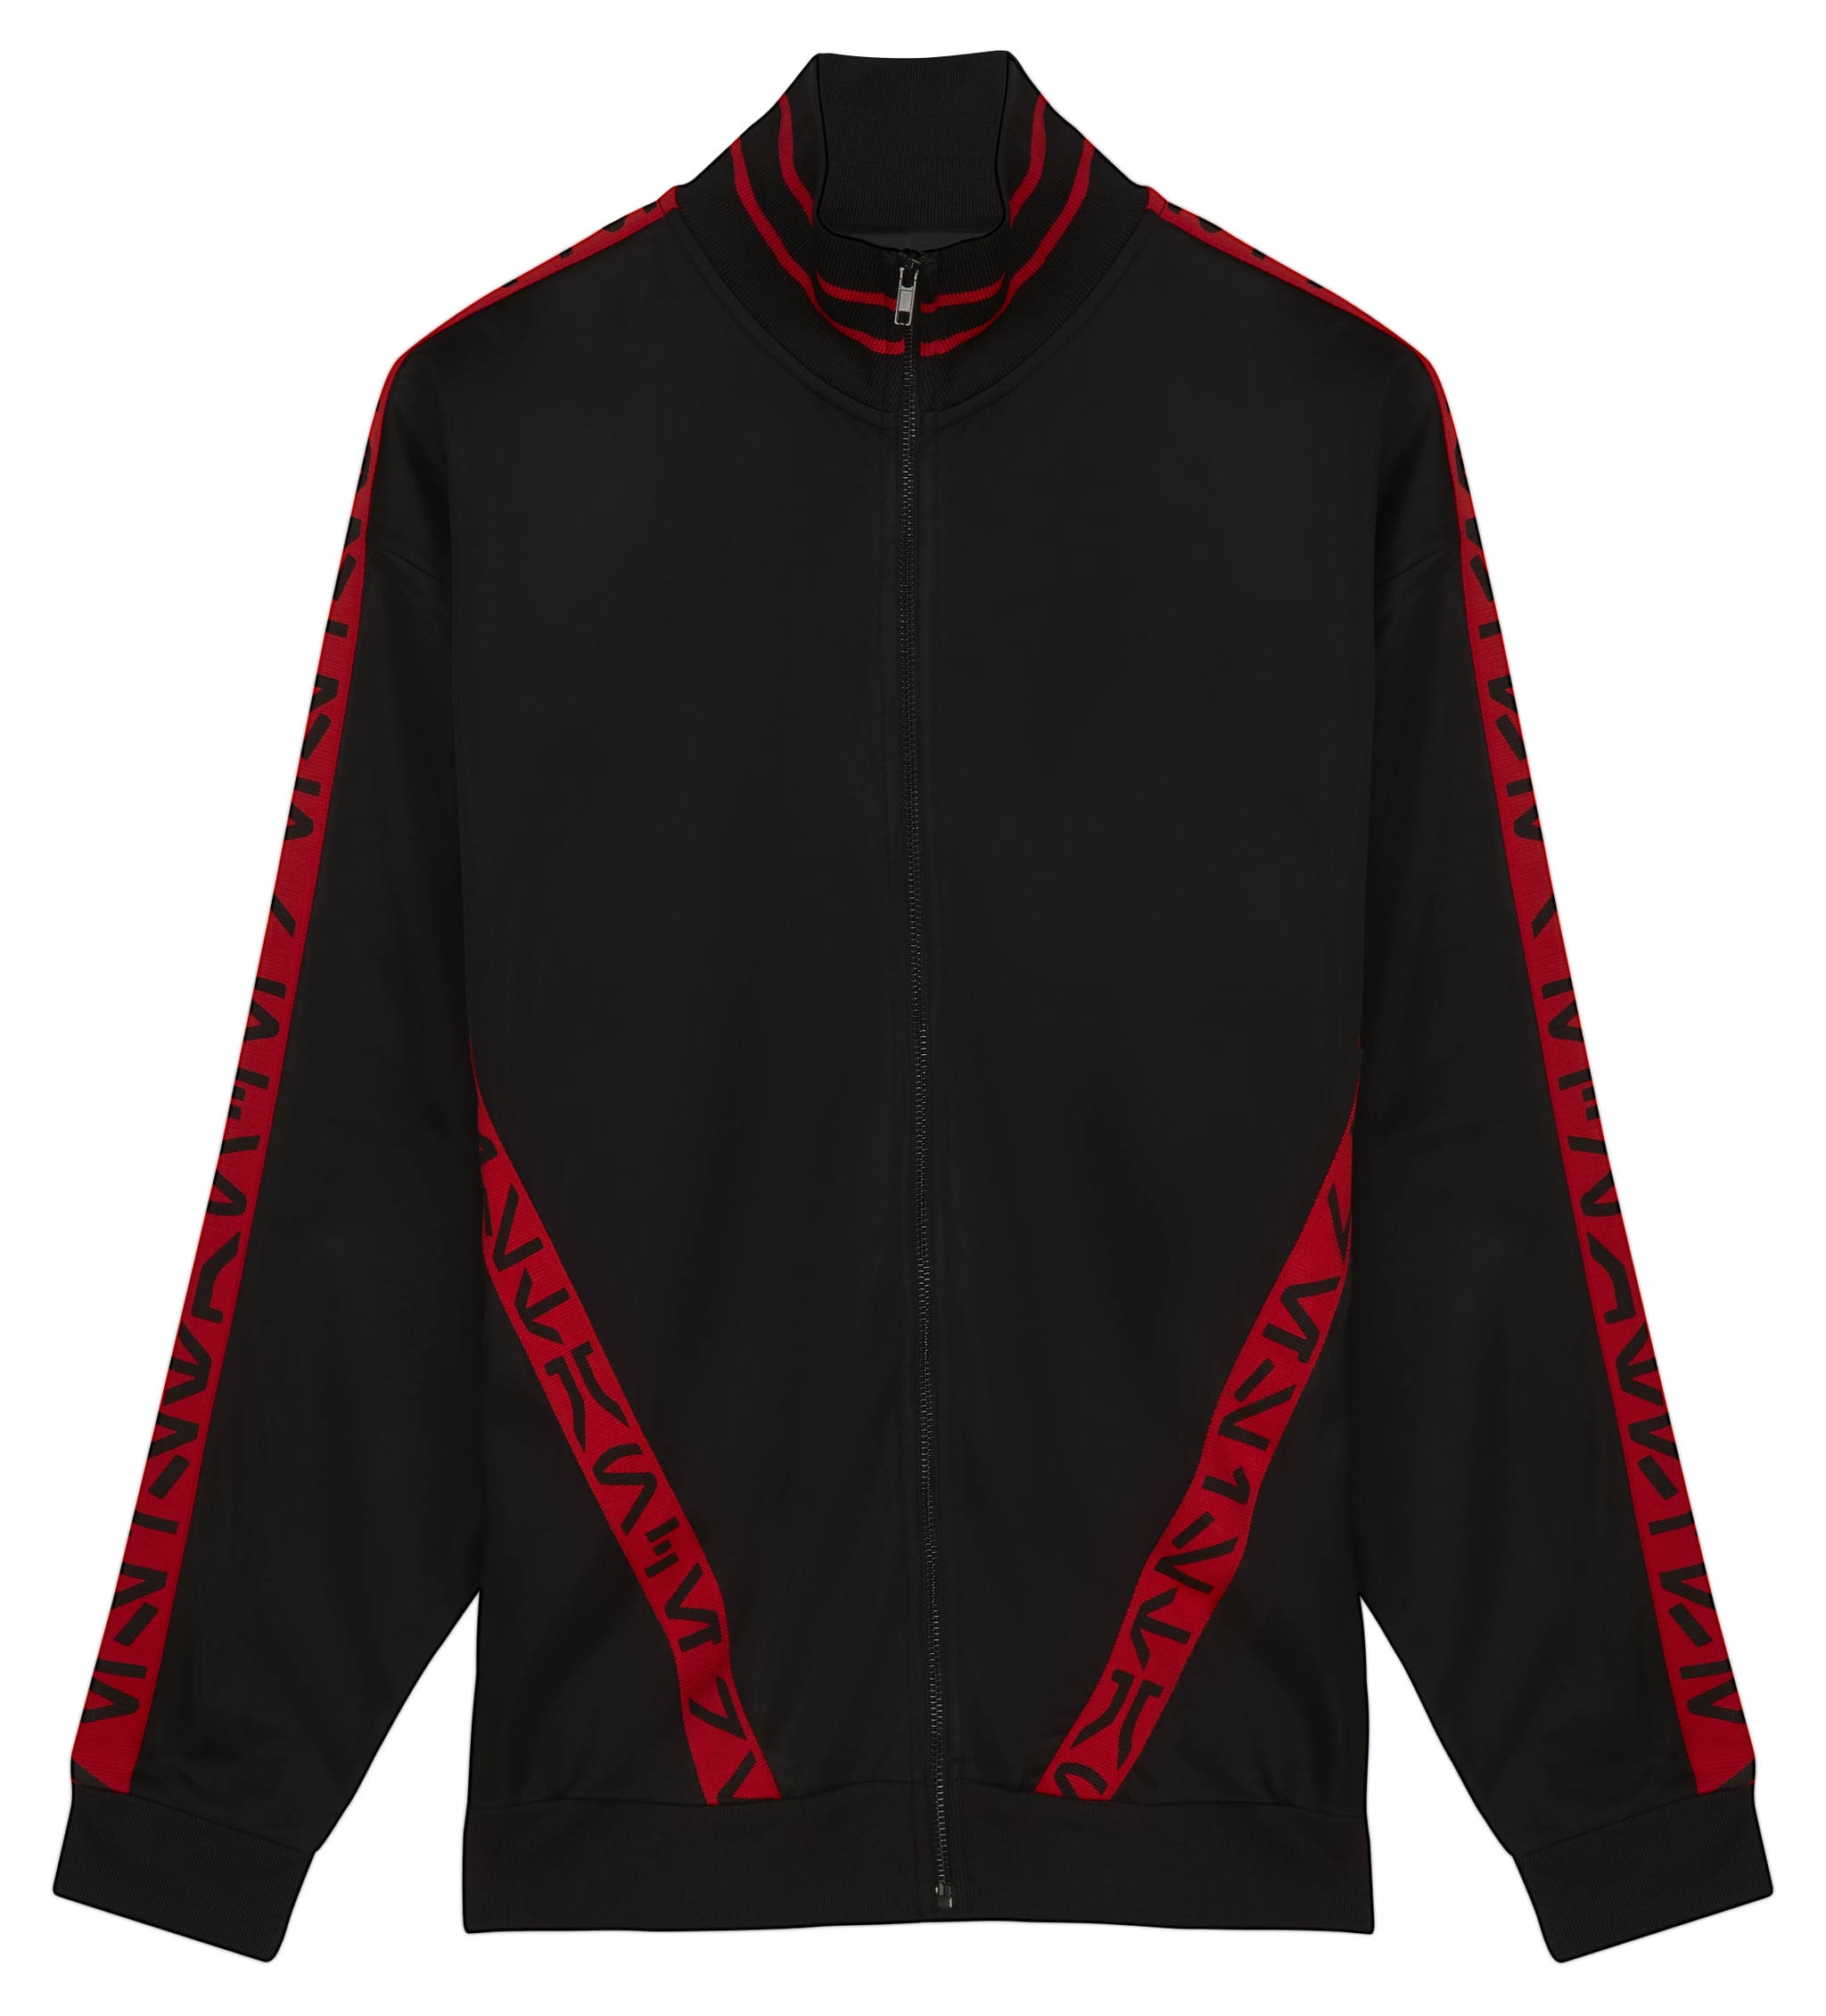 Vergelijkbaar aantrekken temperen ASOS x Star Wars Oversized Poly Tricot Track Jacket With Printed Tape |  Stormtroopers Can't Stop Us From Shopping the ASOS Star Wars Collection |  POPSUGAR Fashion Photo 25